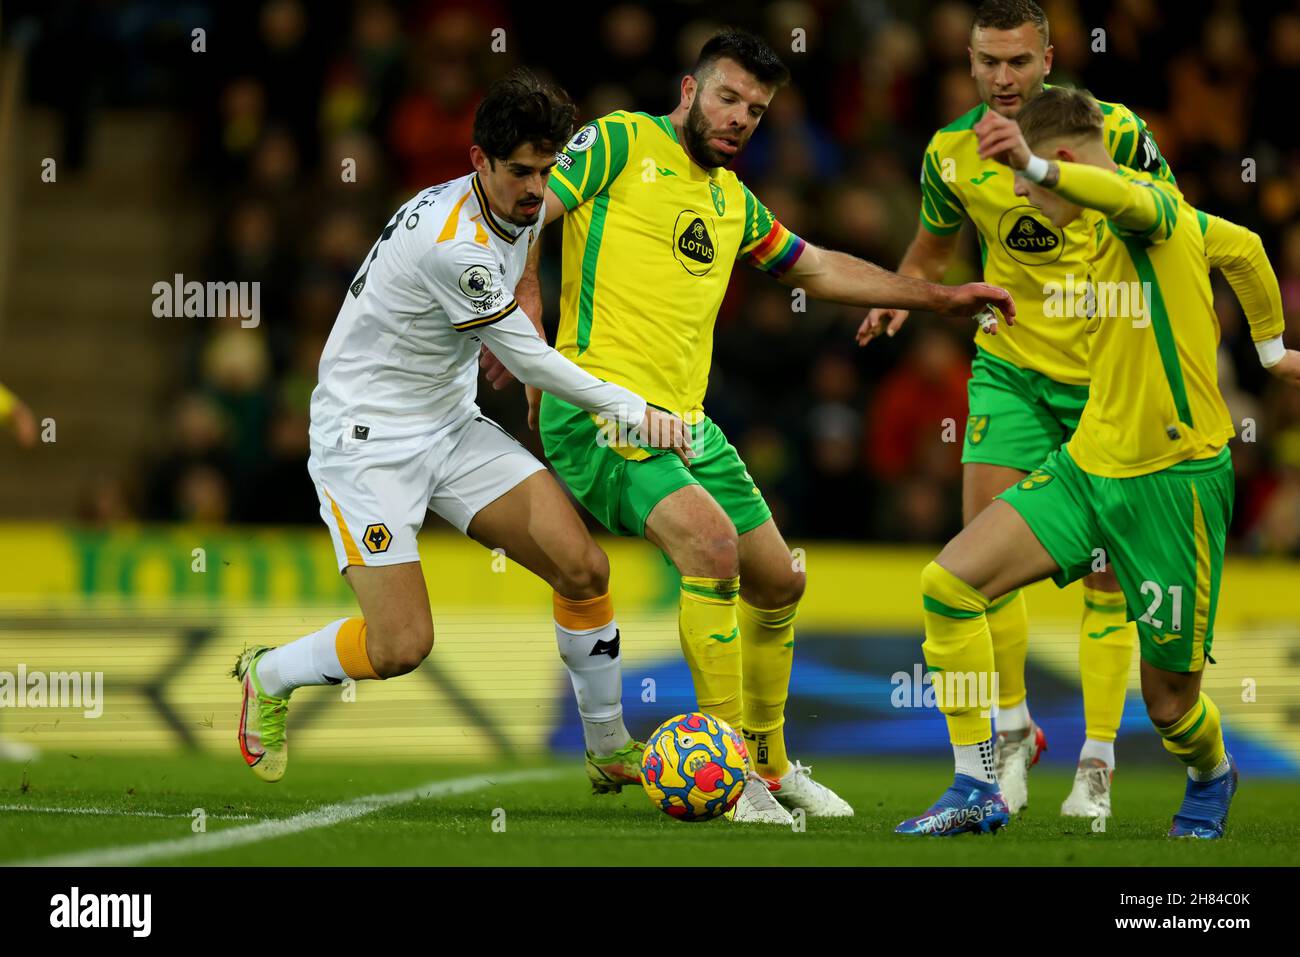 Carrow Road, Norwich, Norforlk, UK. 27th Nov, 2021. Premier League football, Norwich versus Wolverhampton Wanderers; Trinc&#xe3;o of Wolverhampton Wanderers competes for the ball with Grant Hanley of Norwich City Credit: Action Plus Sports/Alamy Live News Stock Photo